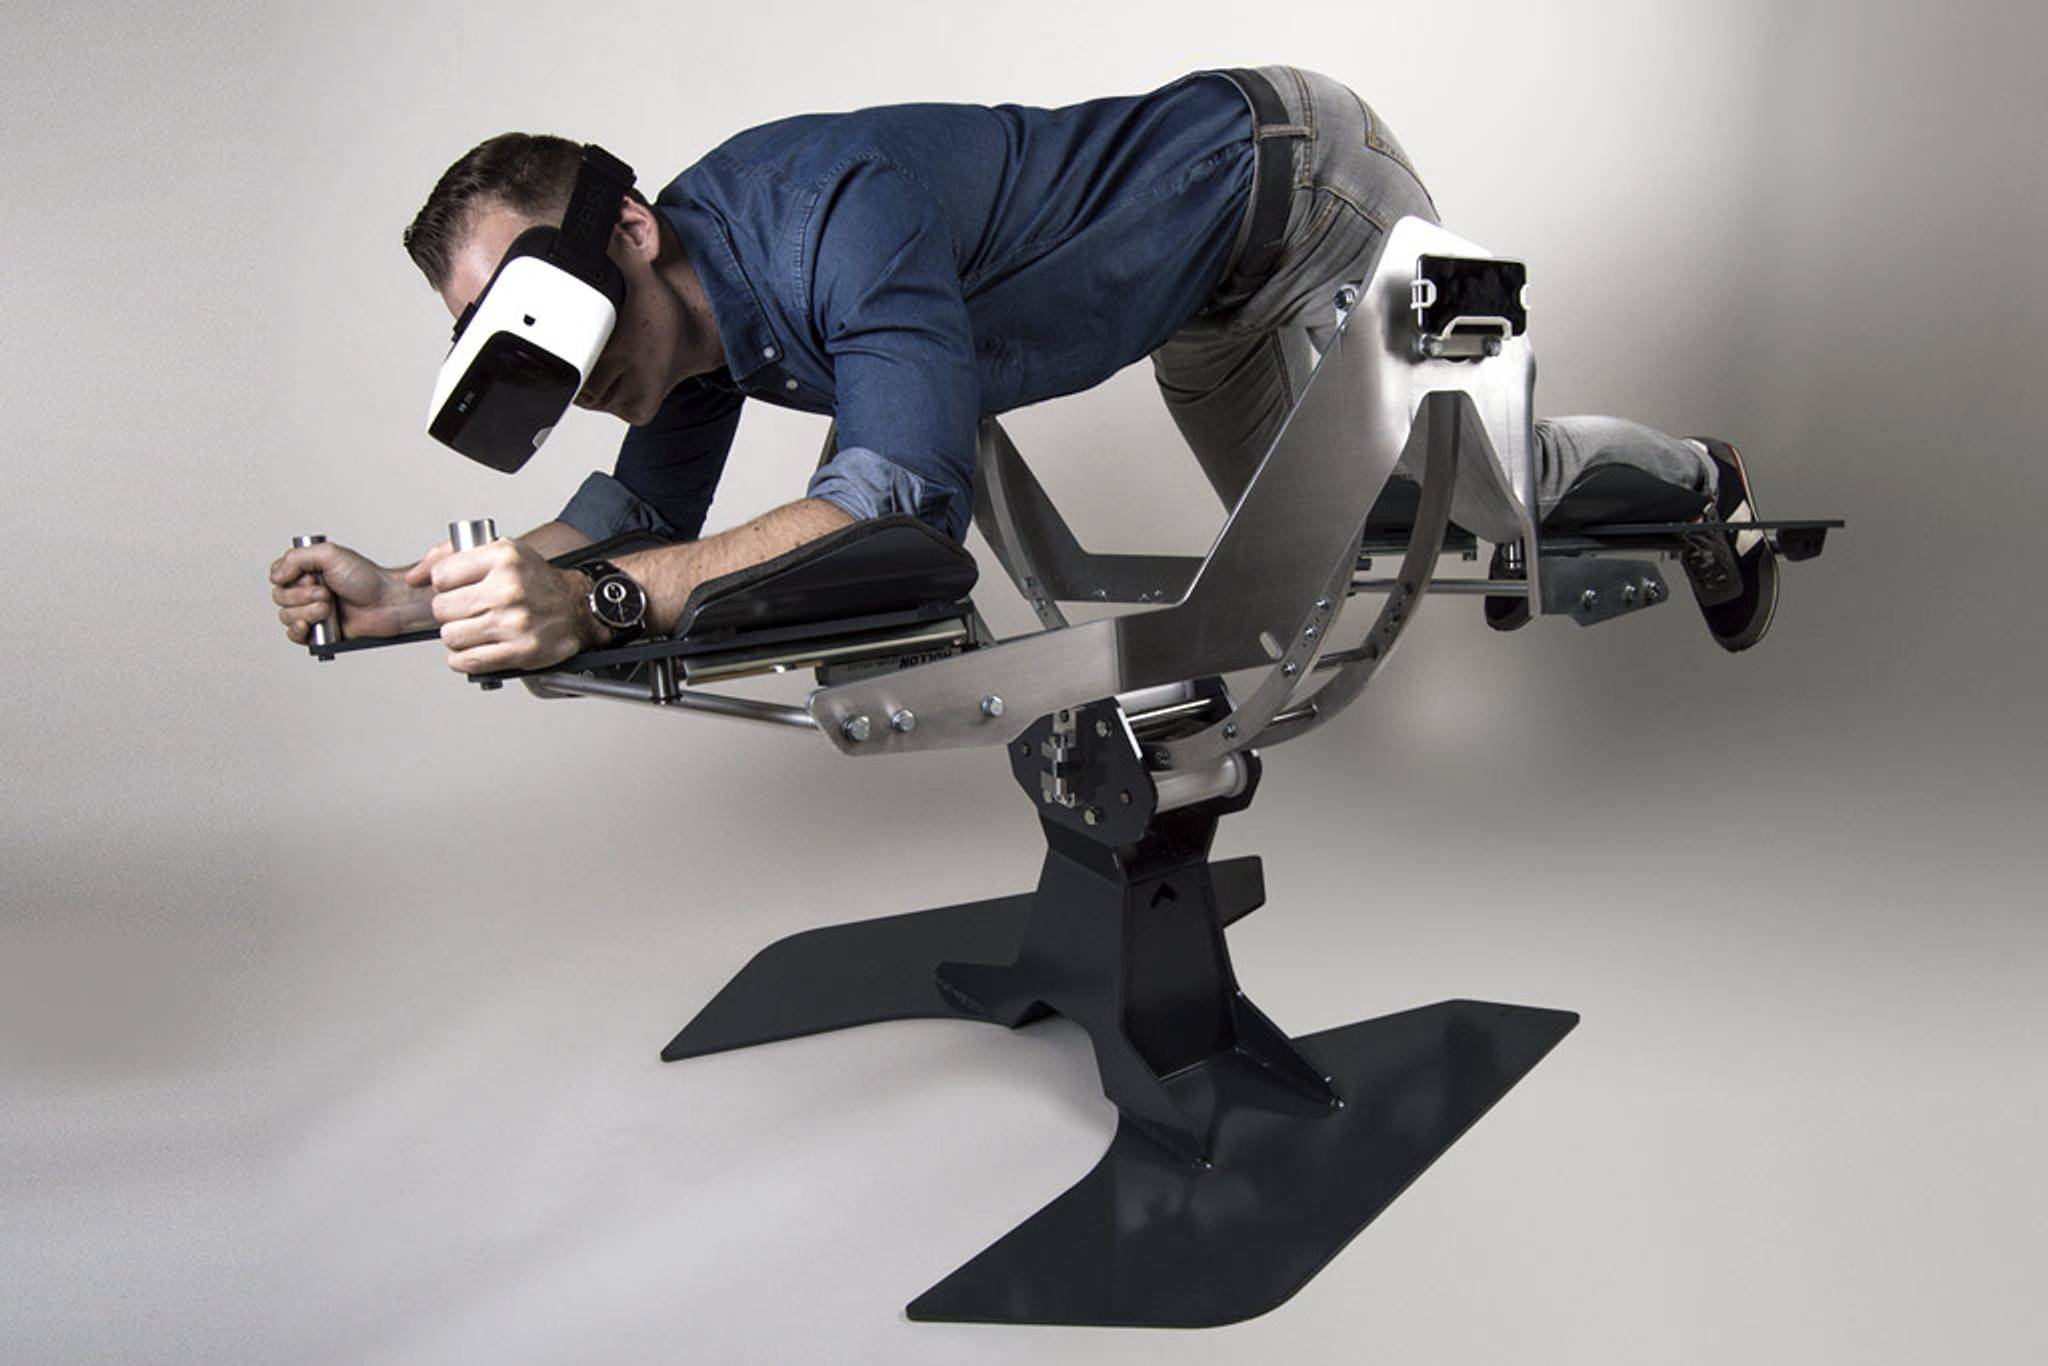 Train your mind and body with Virtual Reality